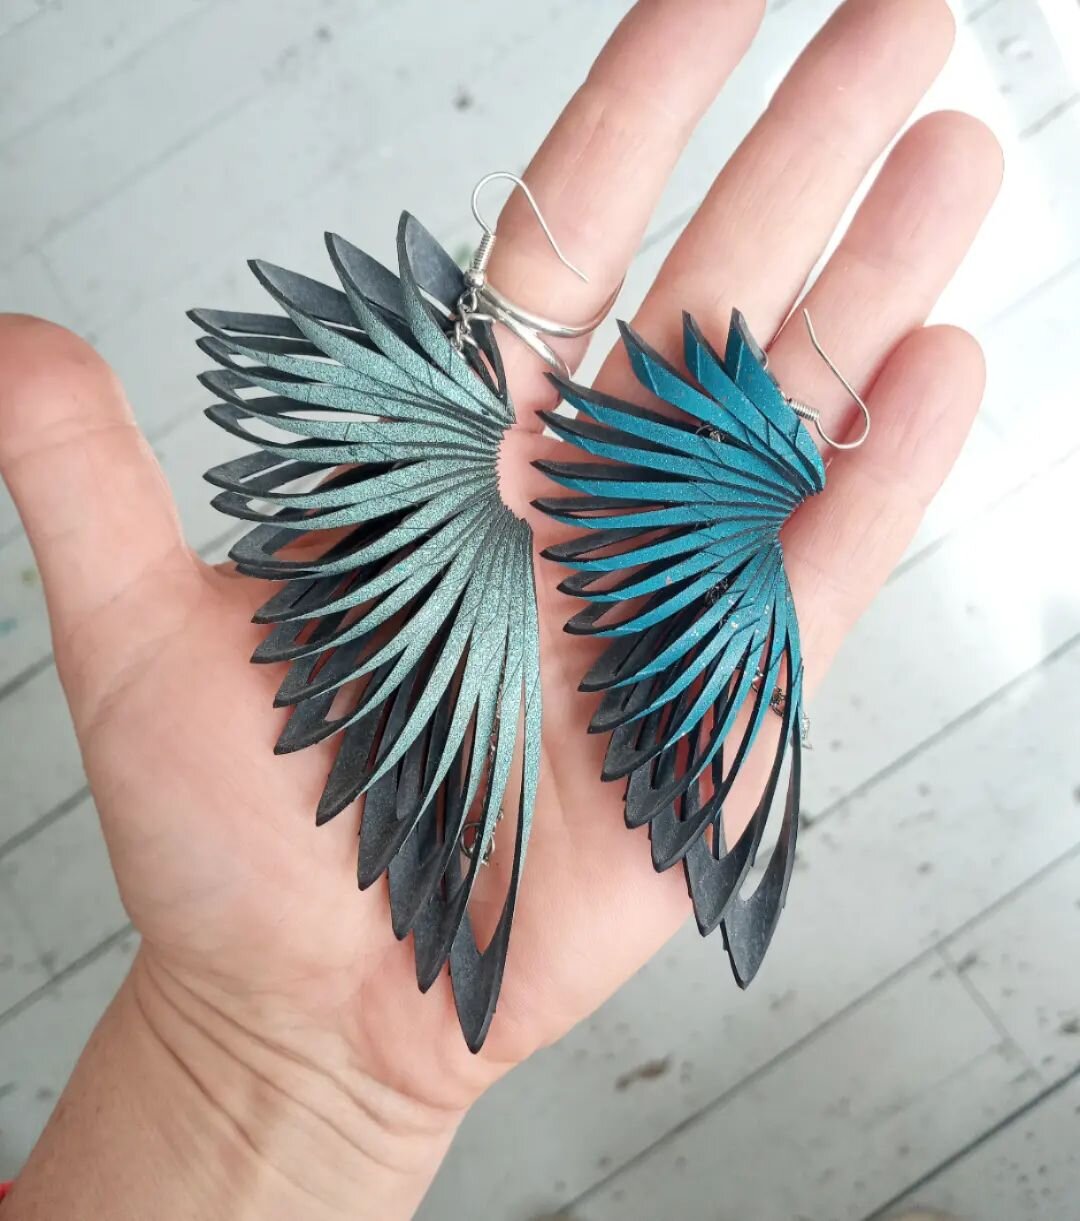 Little birds! Find these and more winged creations at Liverpool's @bluecoatdisplaycentre as part of the Murmurations exhibition starting this Friday 6th May. Im really looking forward to seeing how it's been curated. Here I'm holding the mini and max